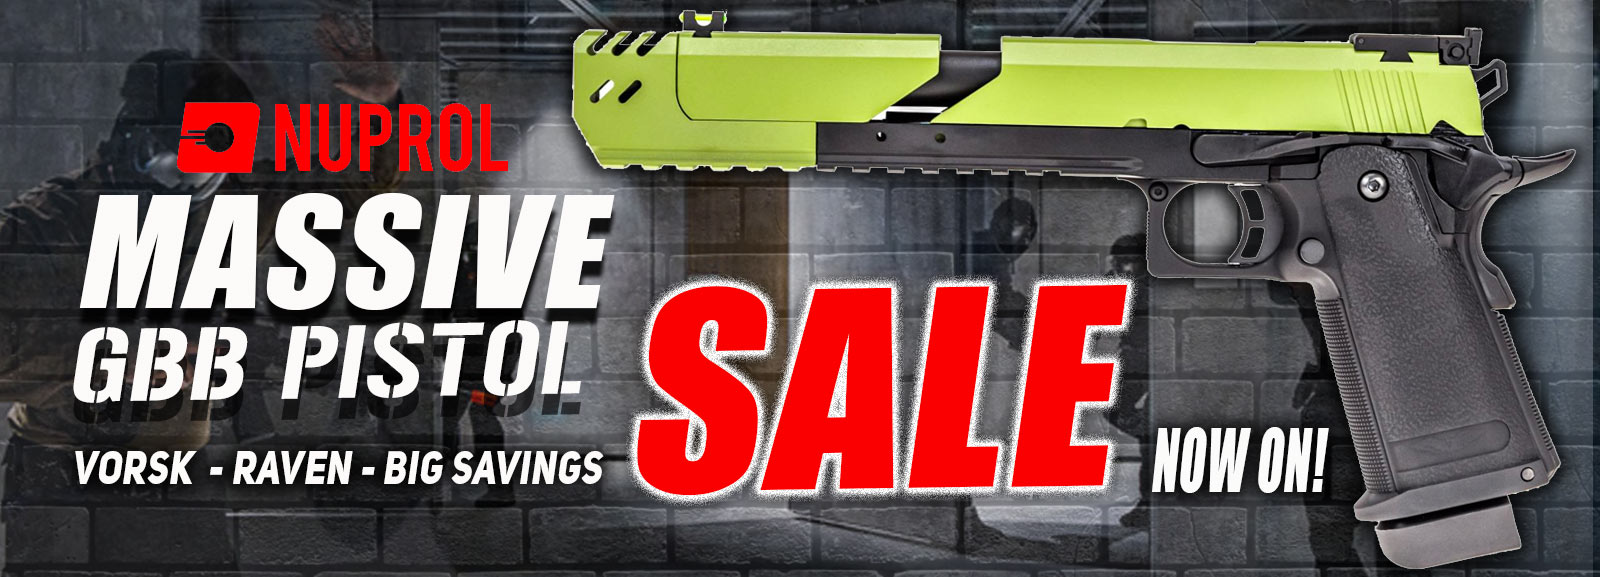 nuprol gbb airsoft pistol sale now on